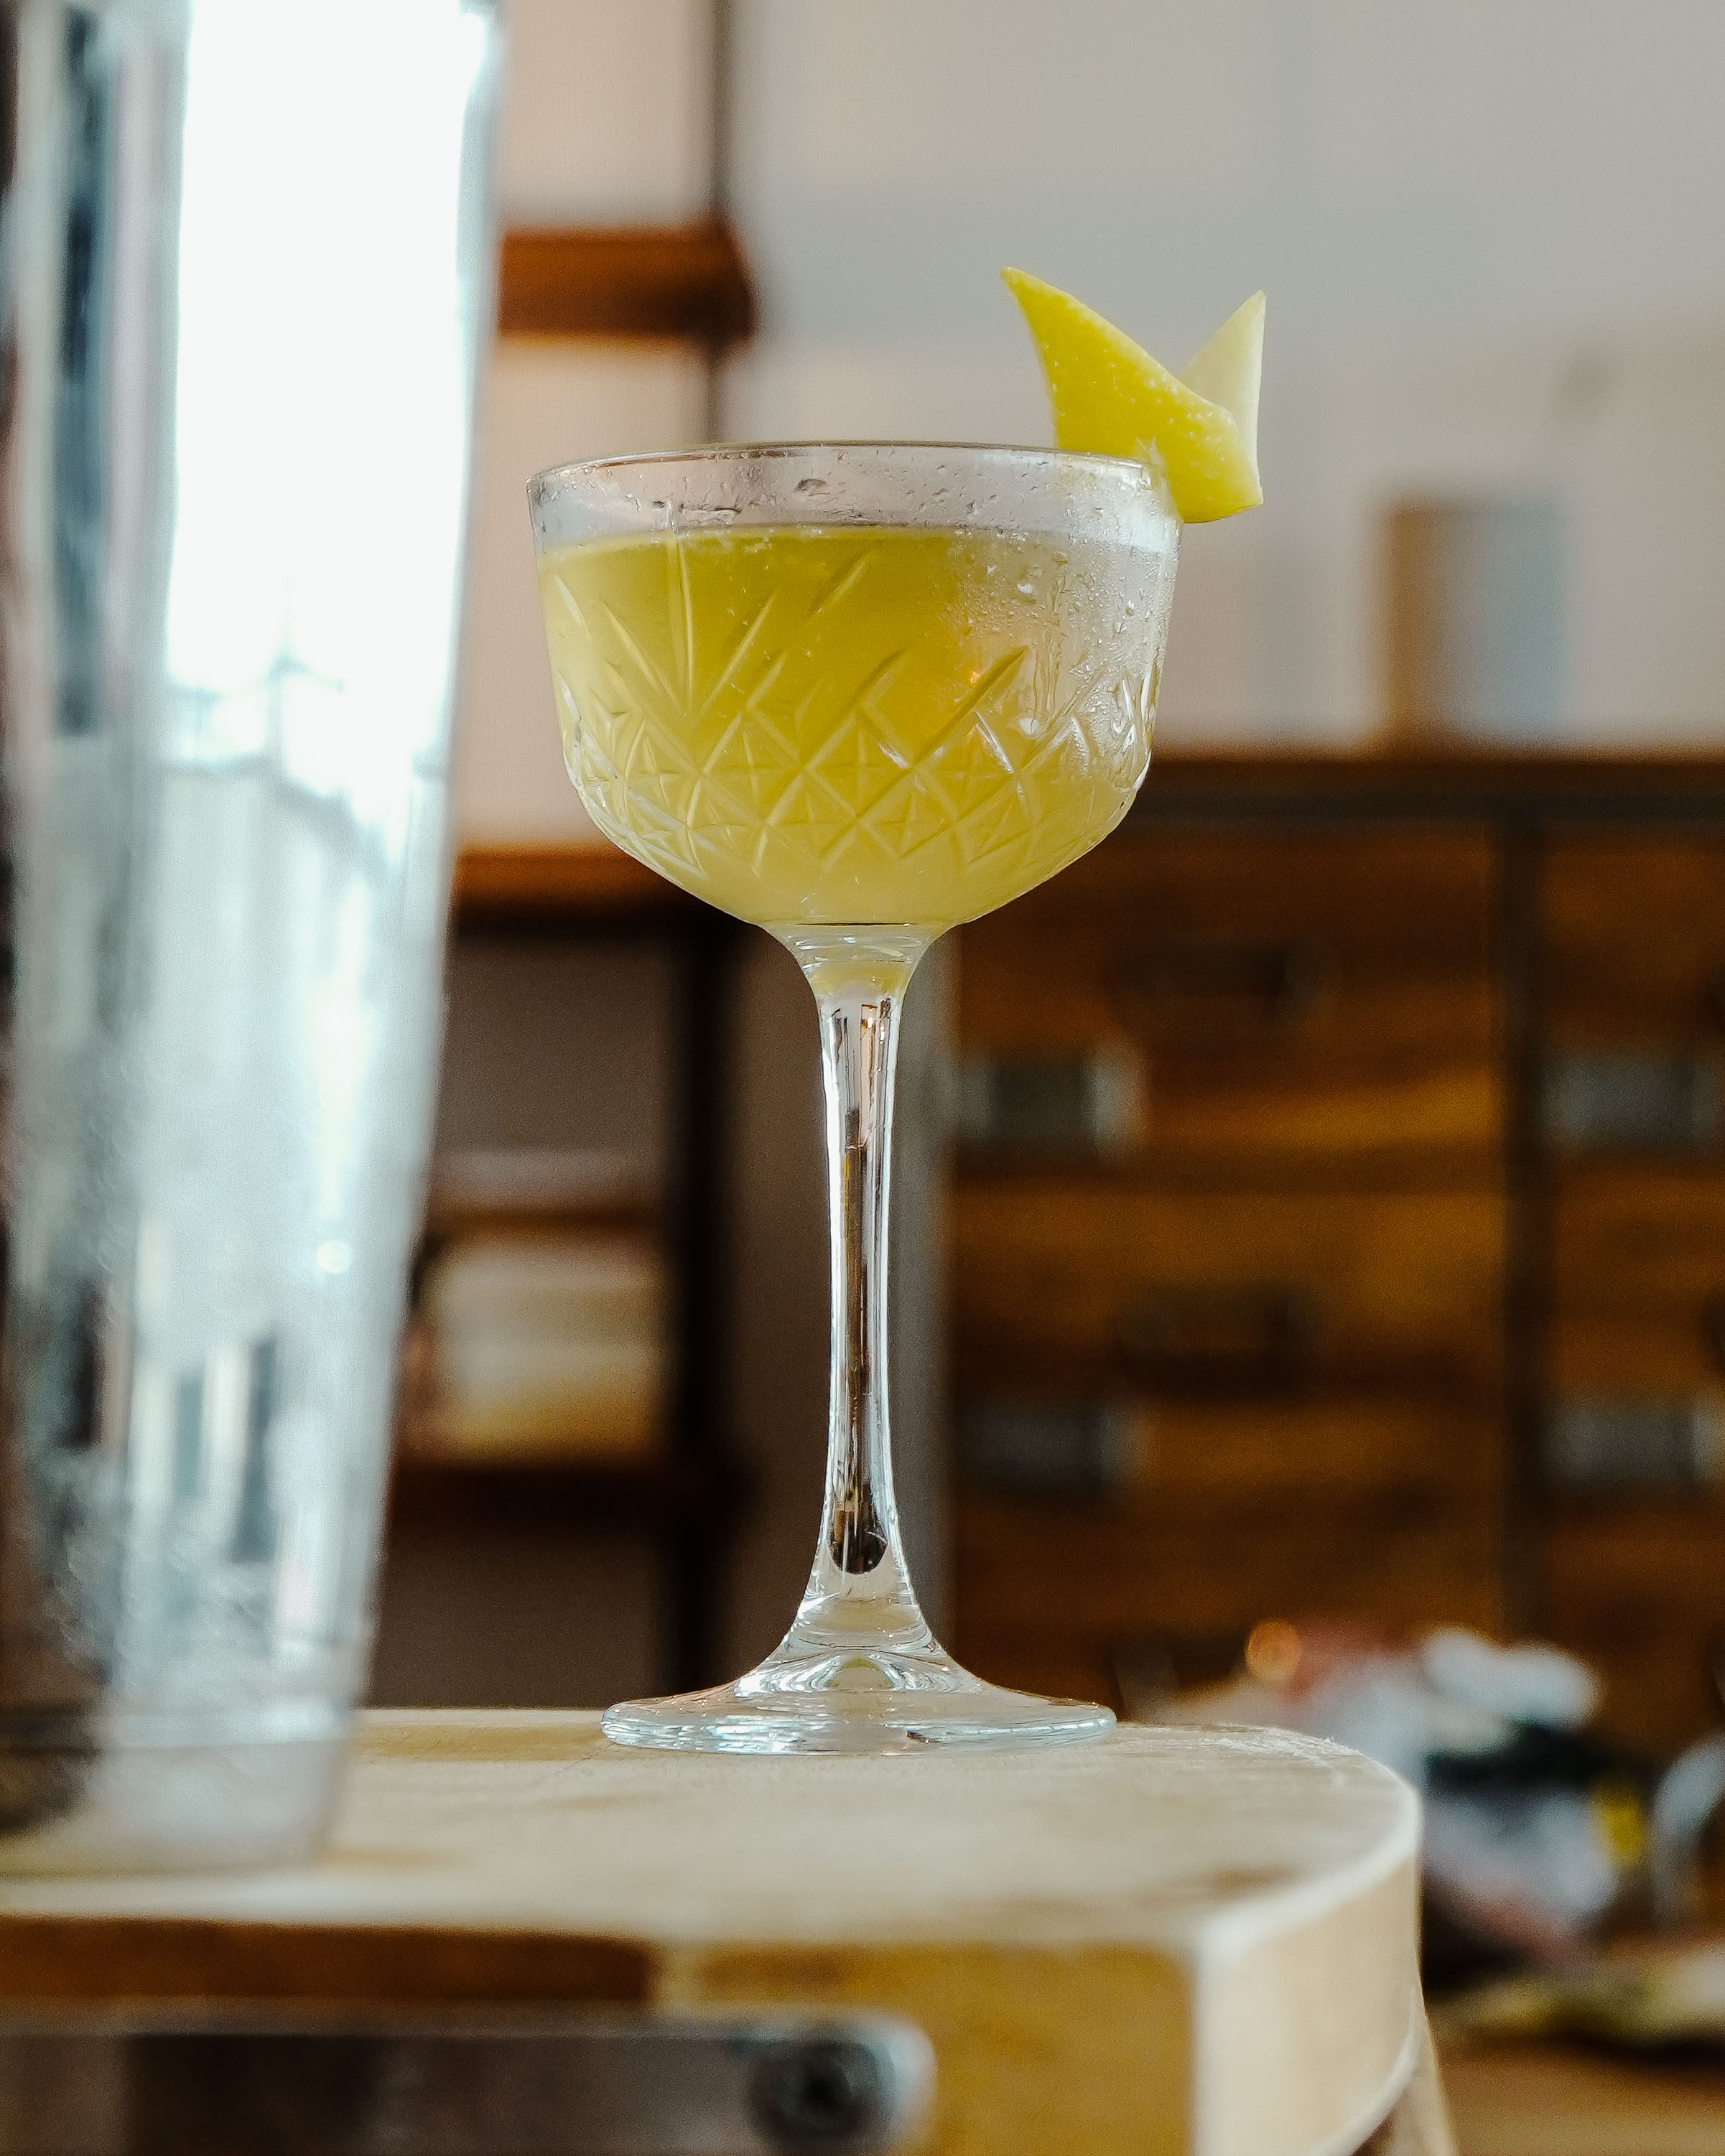 How to make the French 75 Cocktail